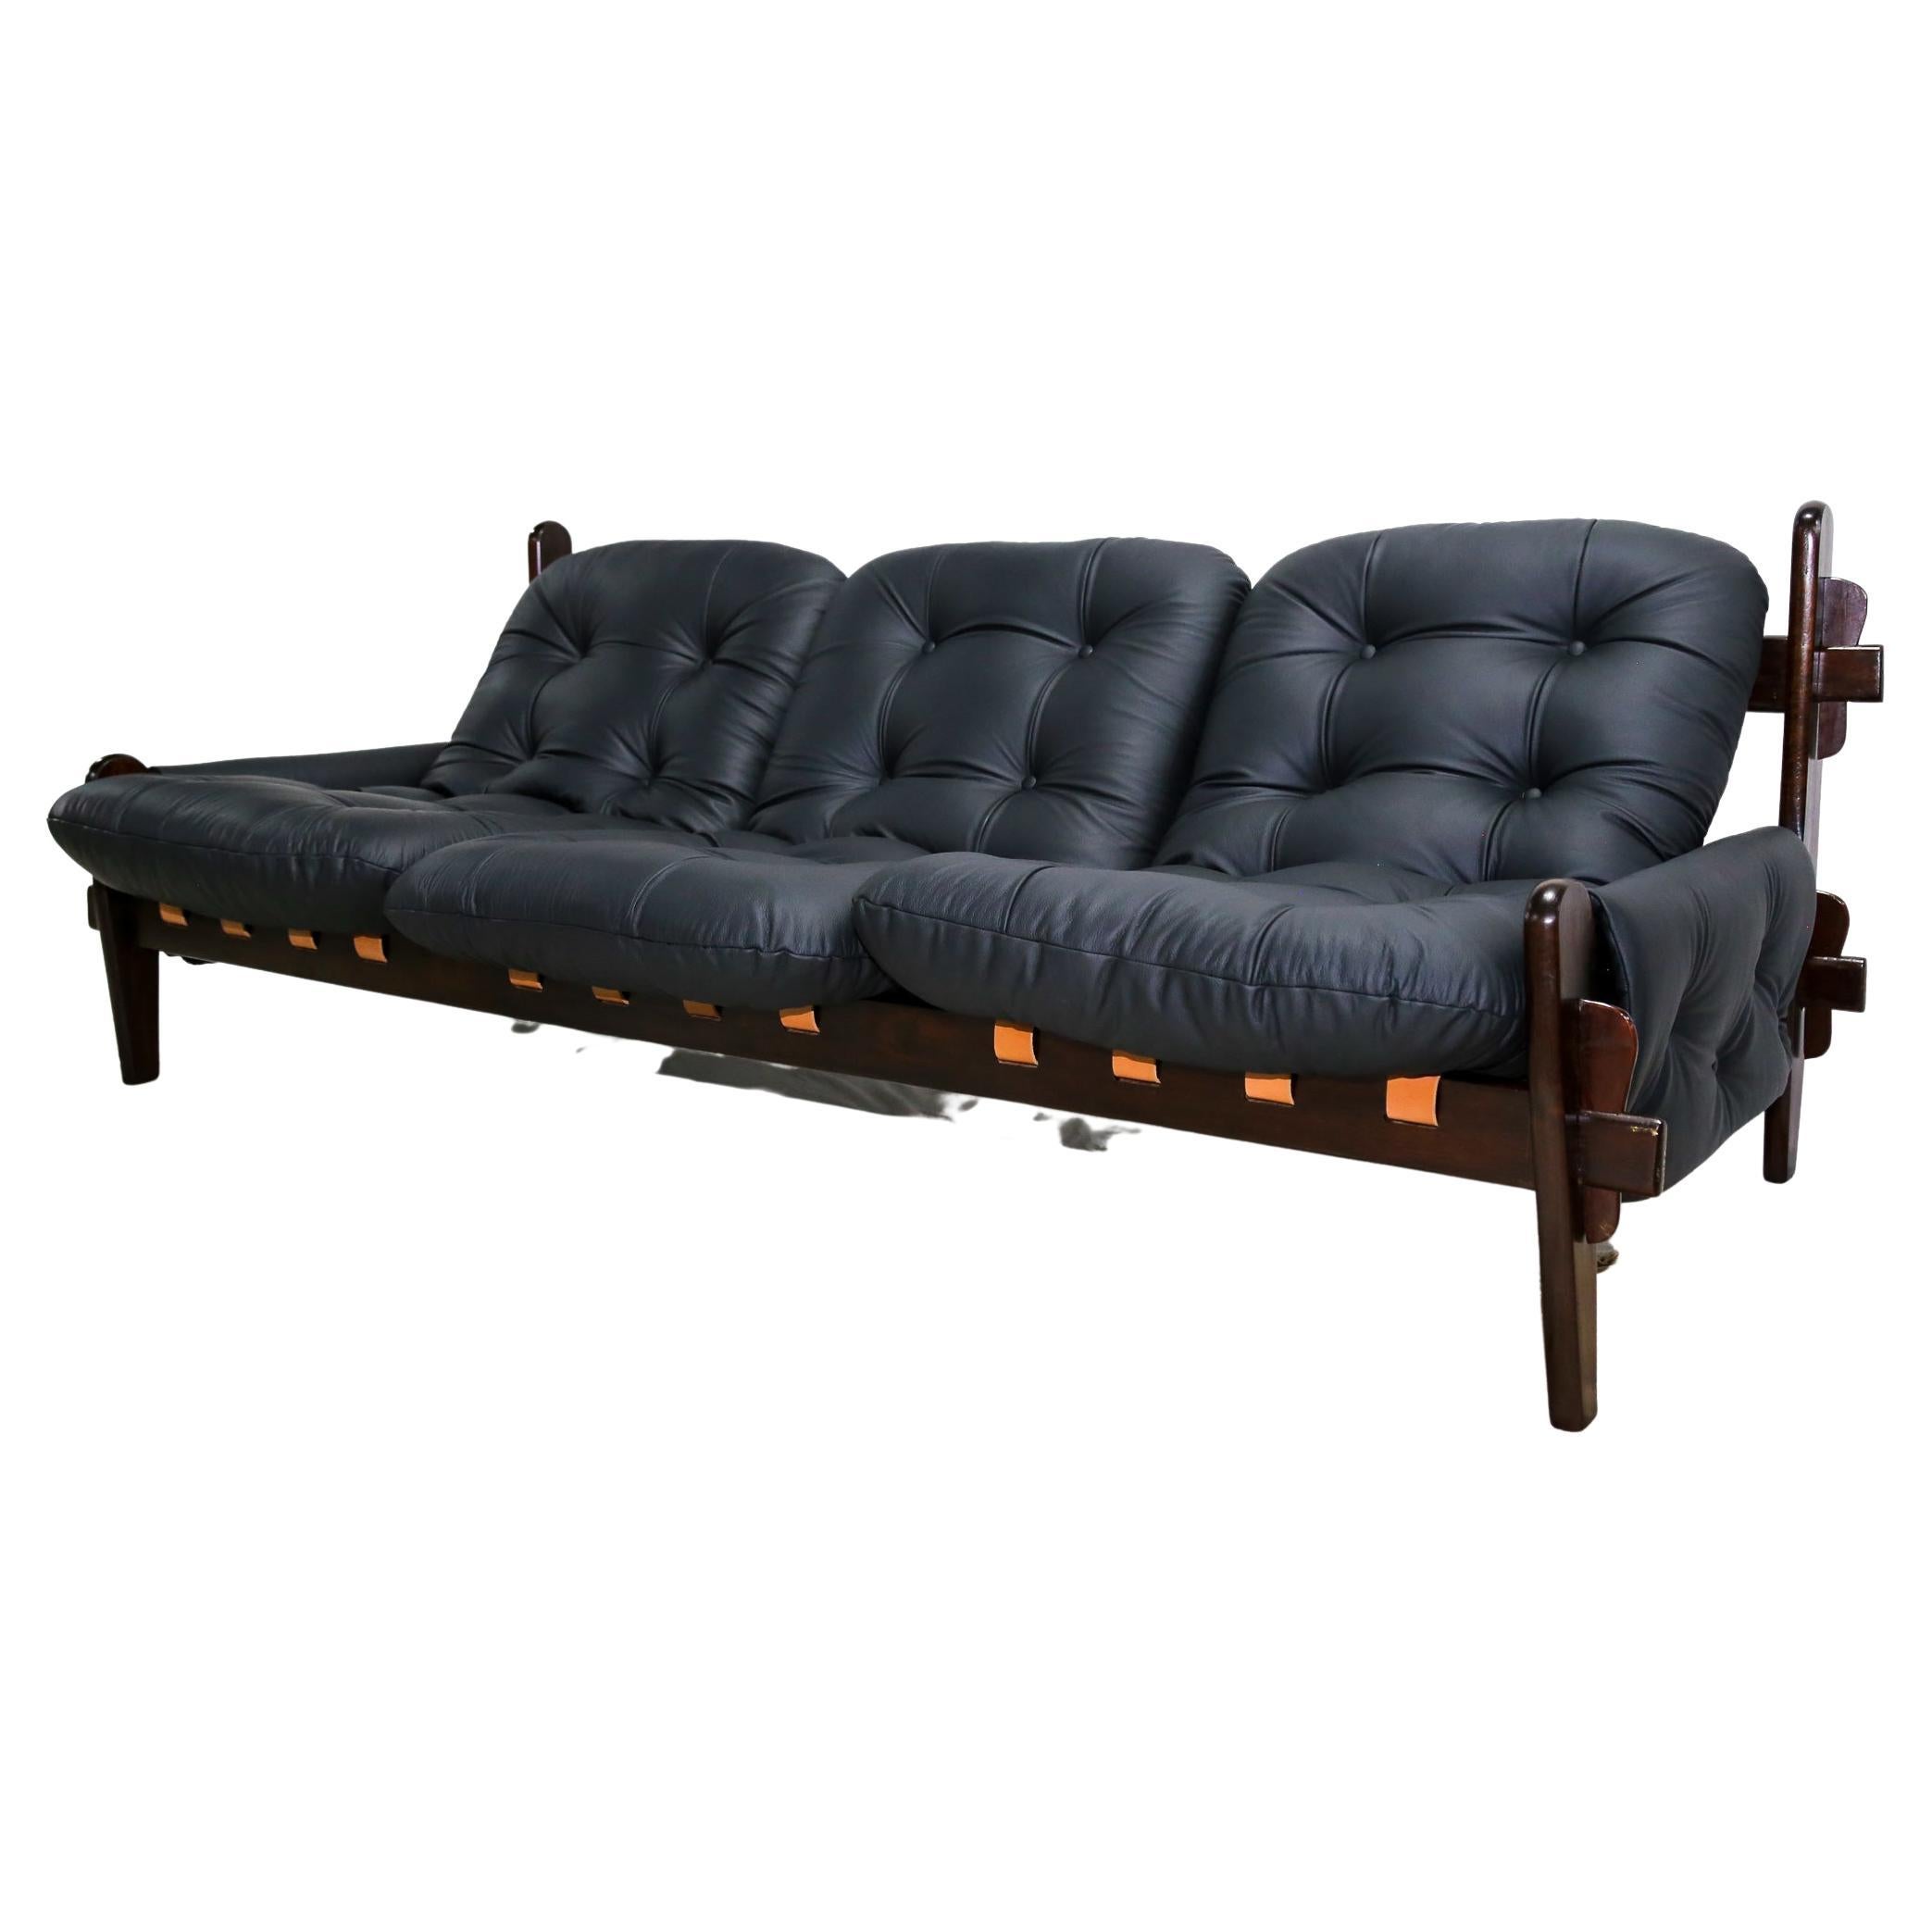 Mid-Century Modern Sofa in Hardwood & Leather by Jean Gillon, 1970, Brazil For Sale